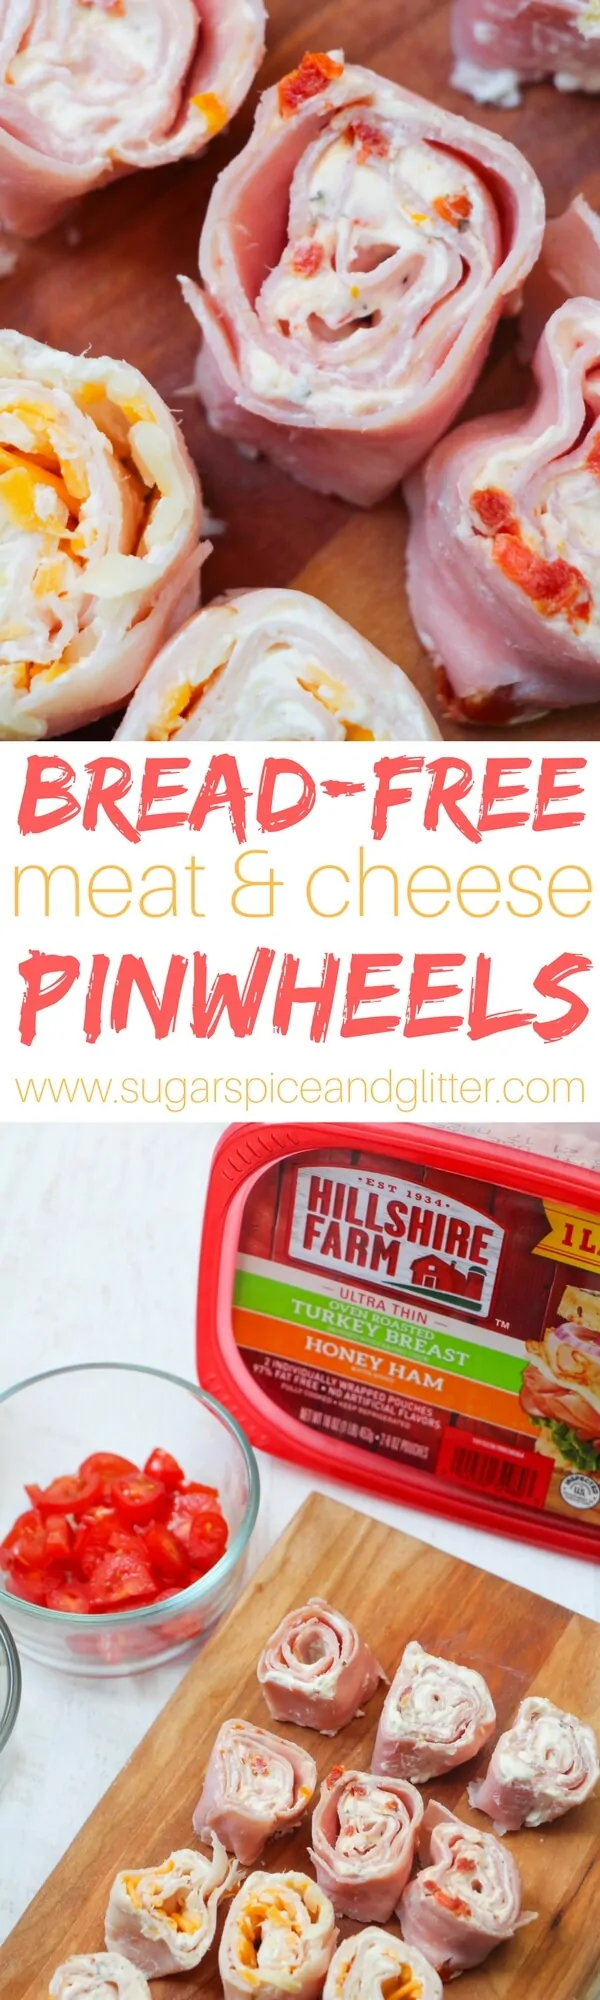 A fun lunch box idea for kids - these bread-free pinwheel meatwiches are a delicious keto snack